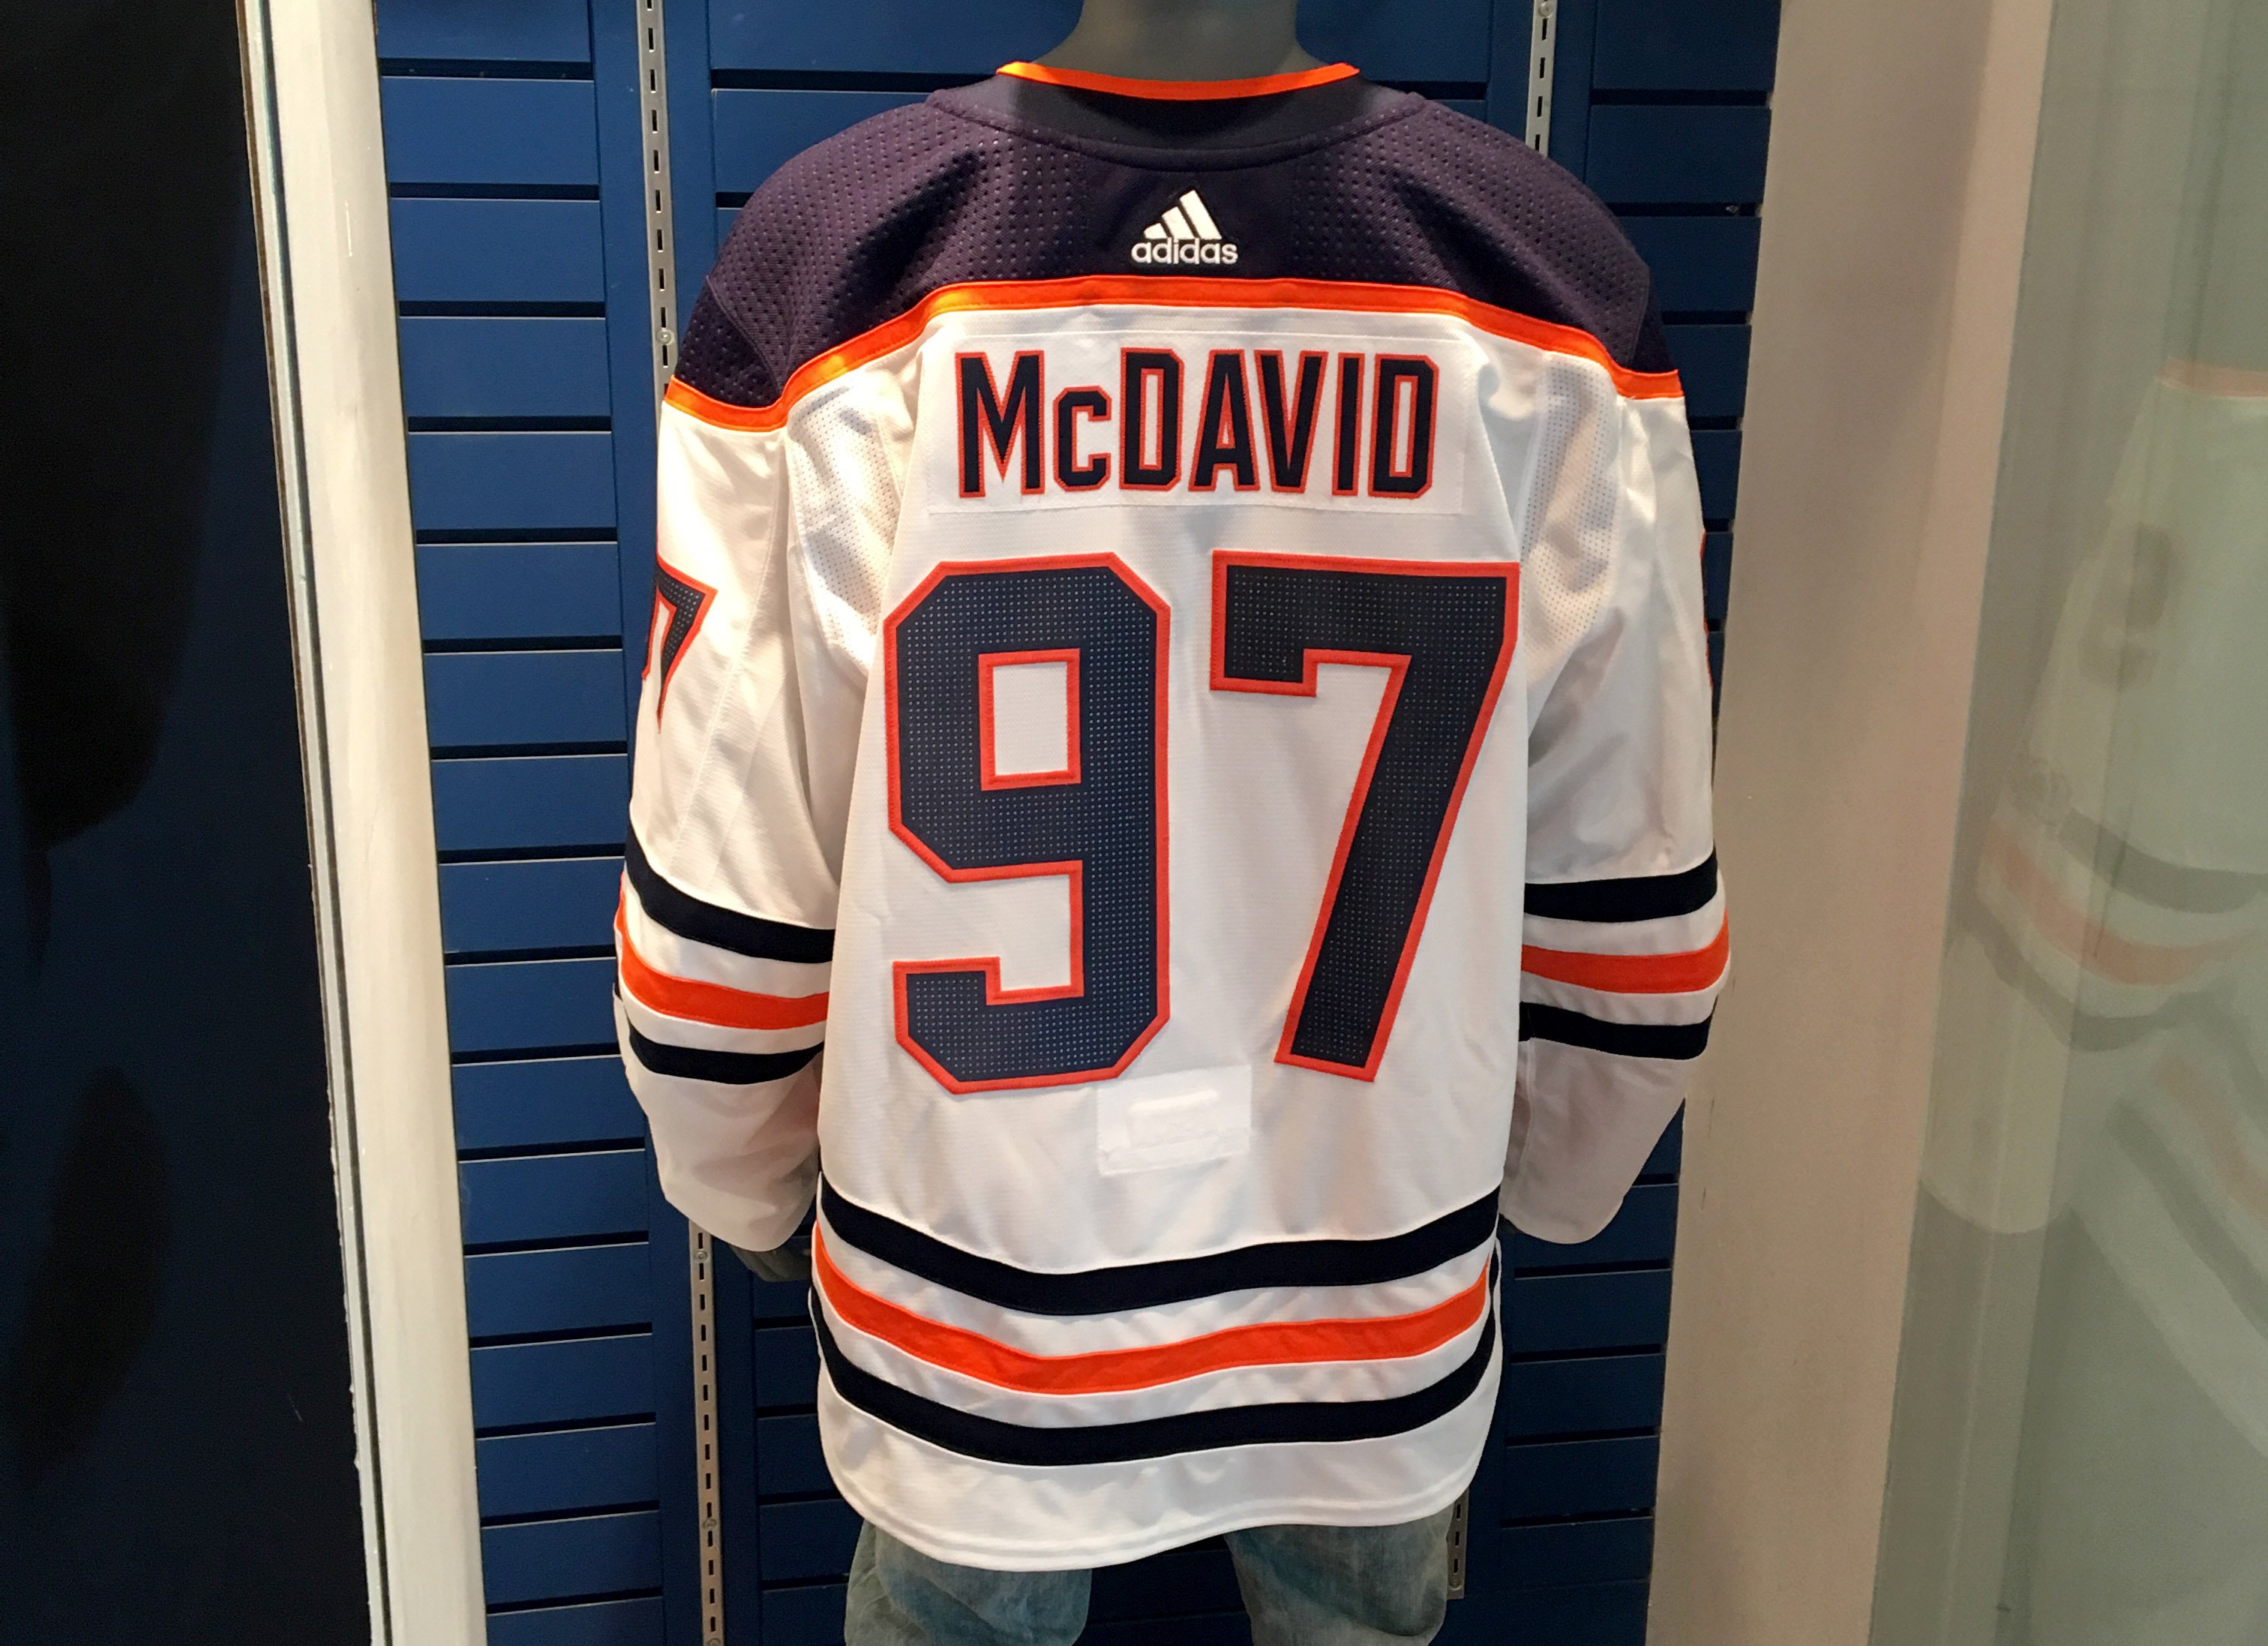 Edmonton Oilers on X: The #Oilers Store's pop-up location is also